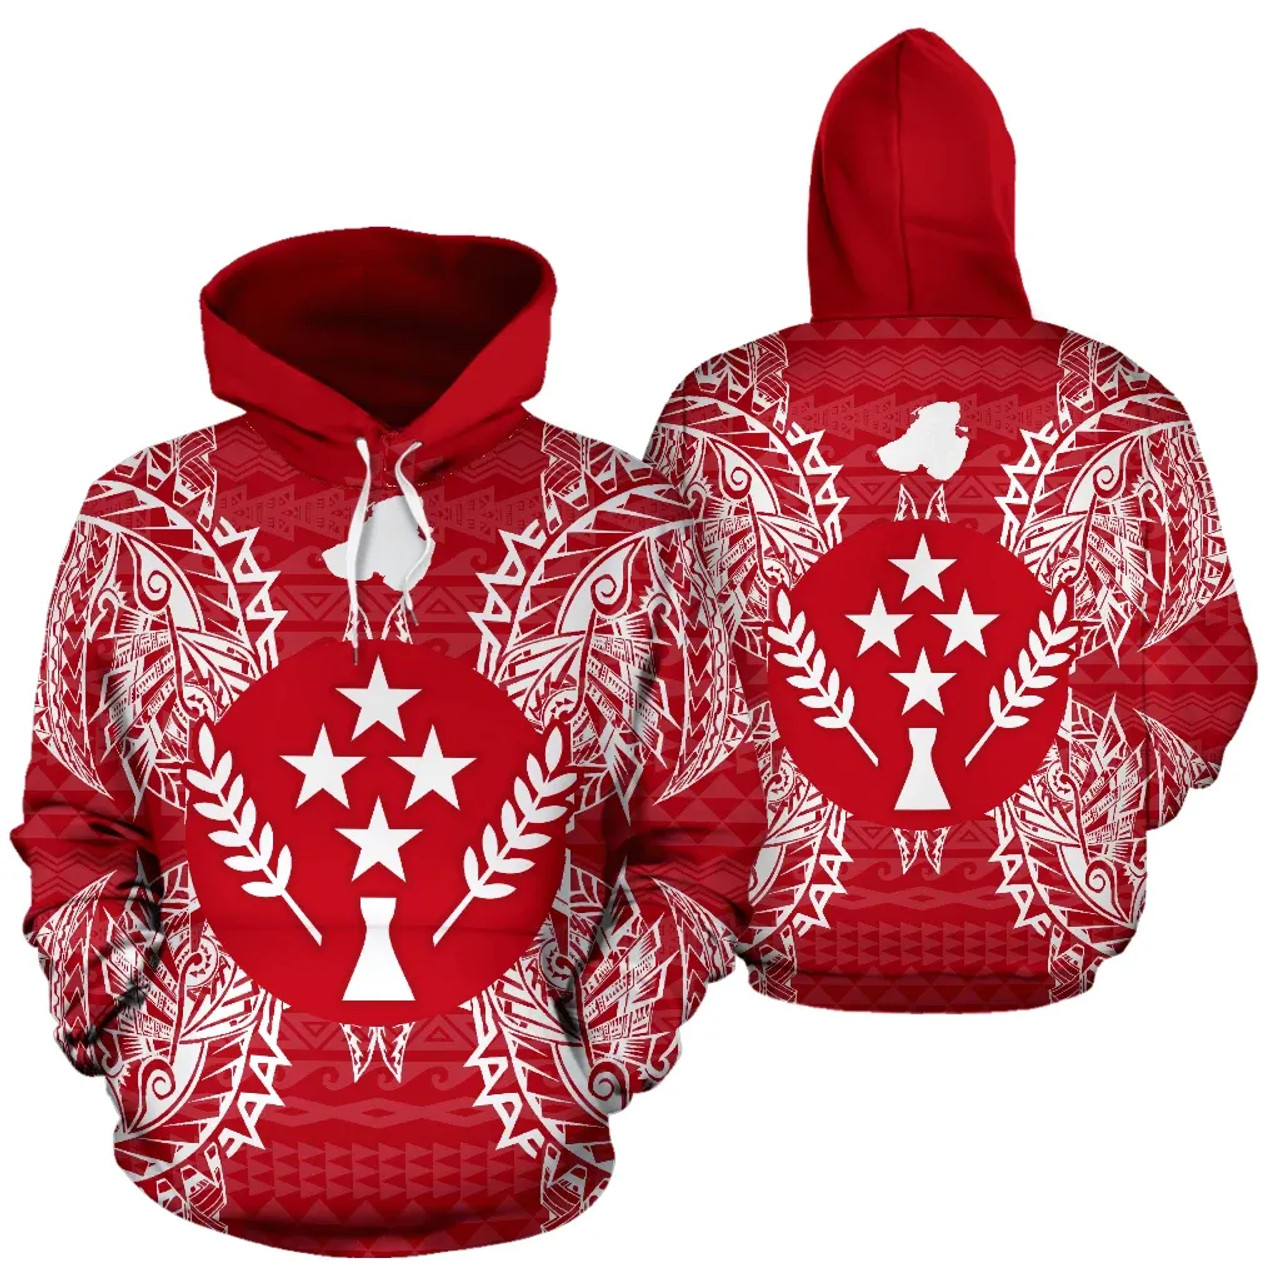 Kosrae Polynesian All Over Hoodie Map Red White